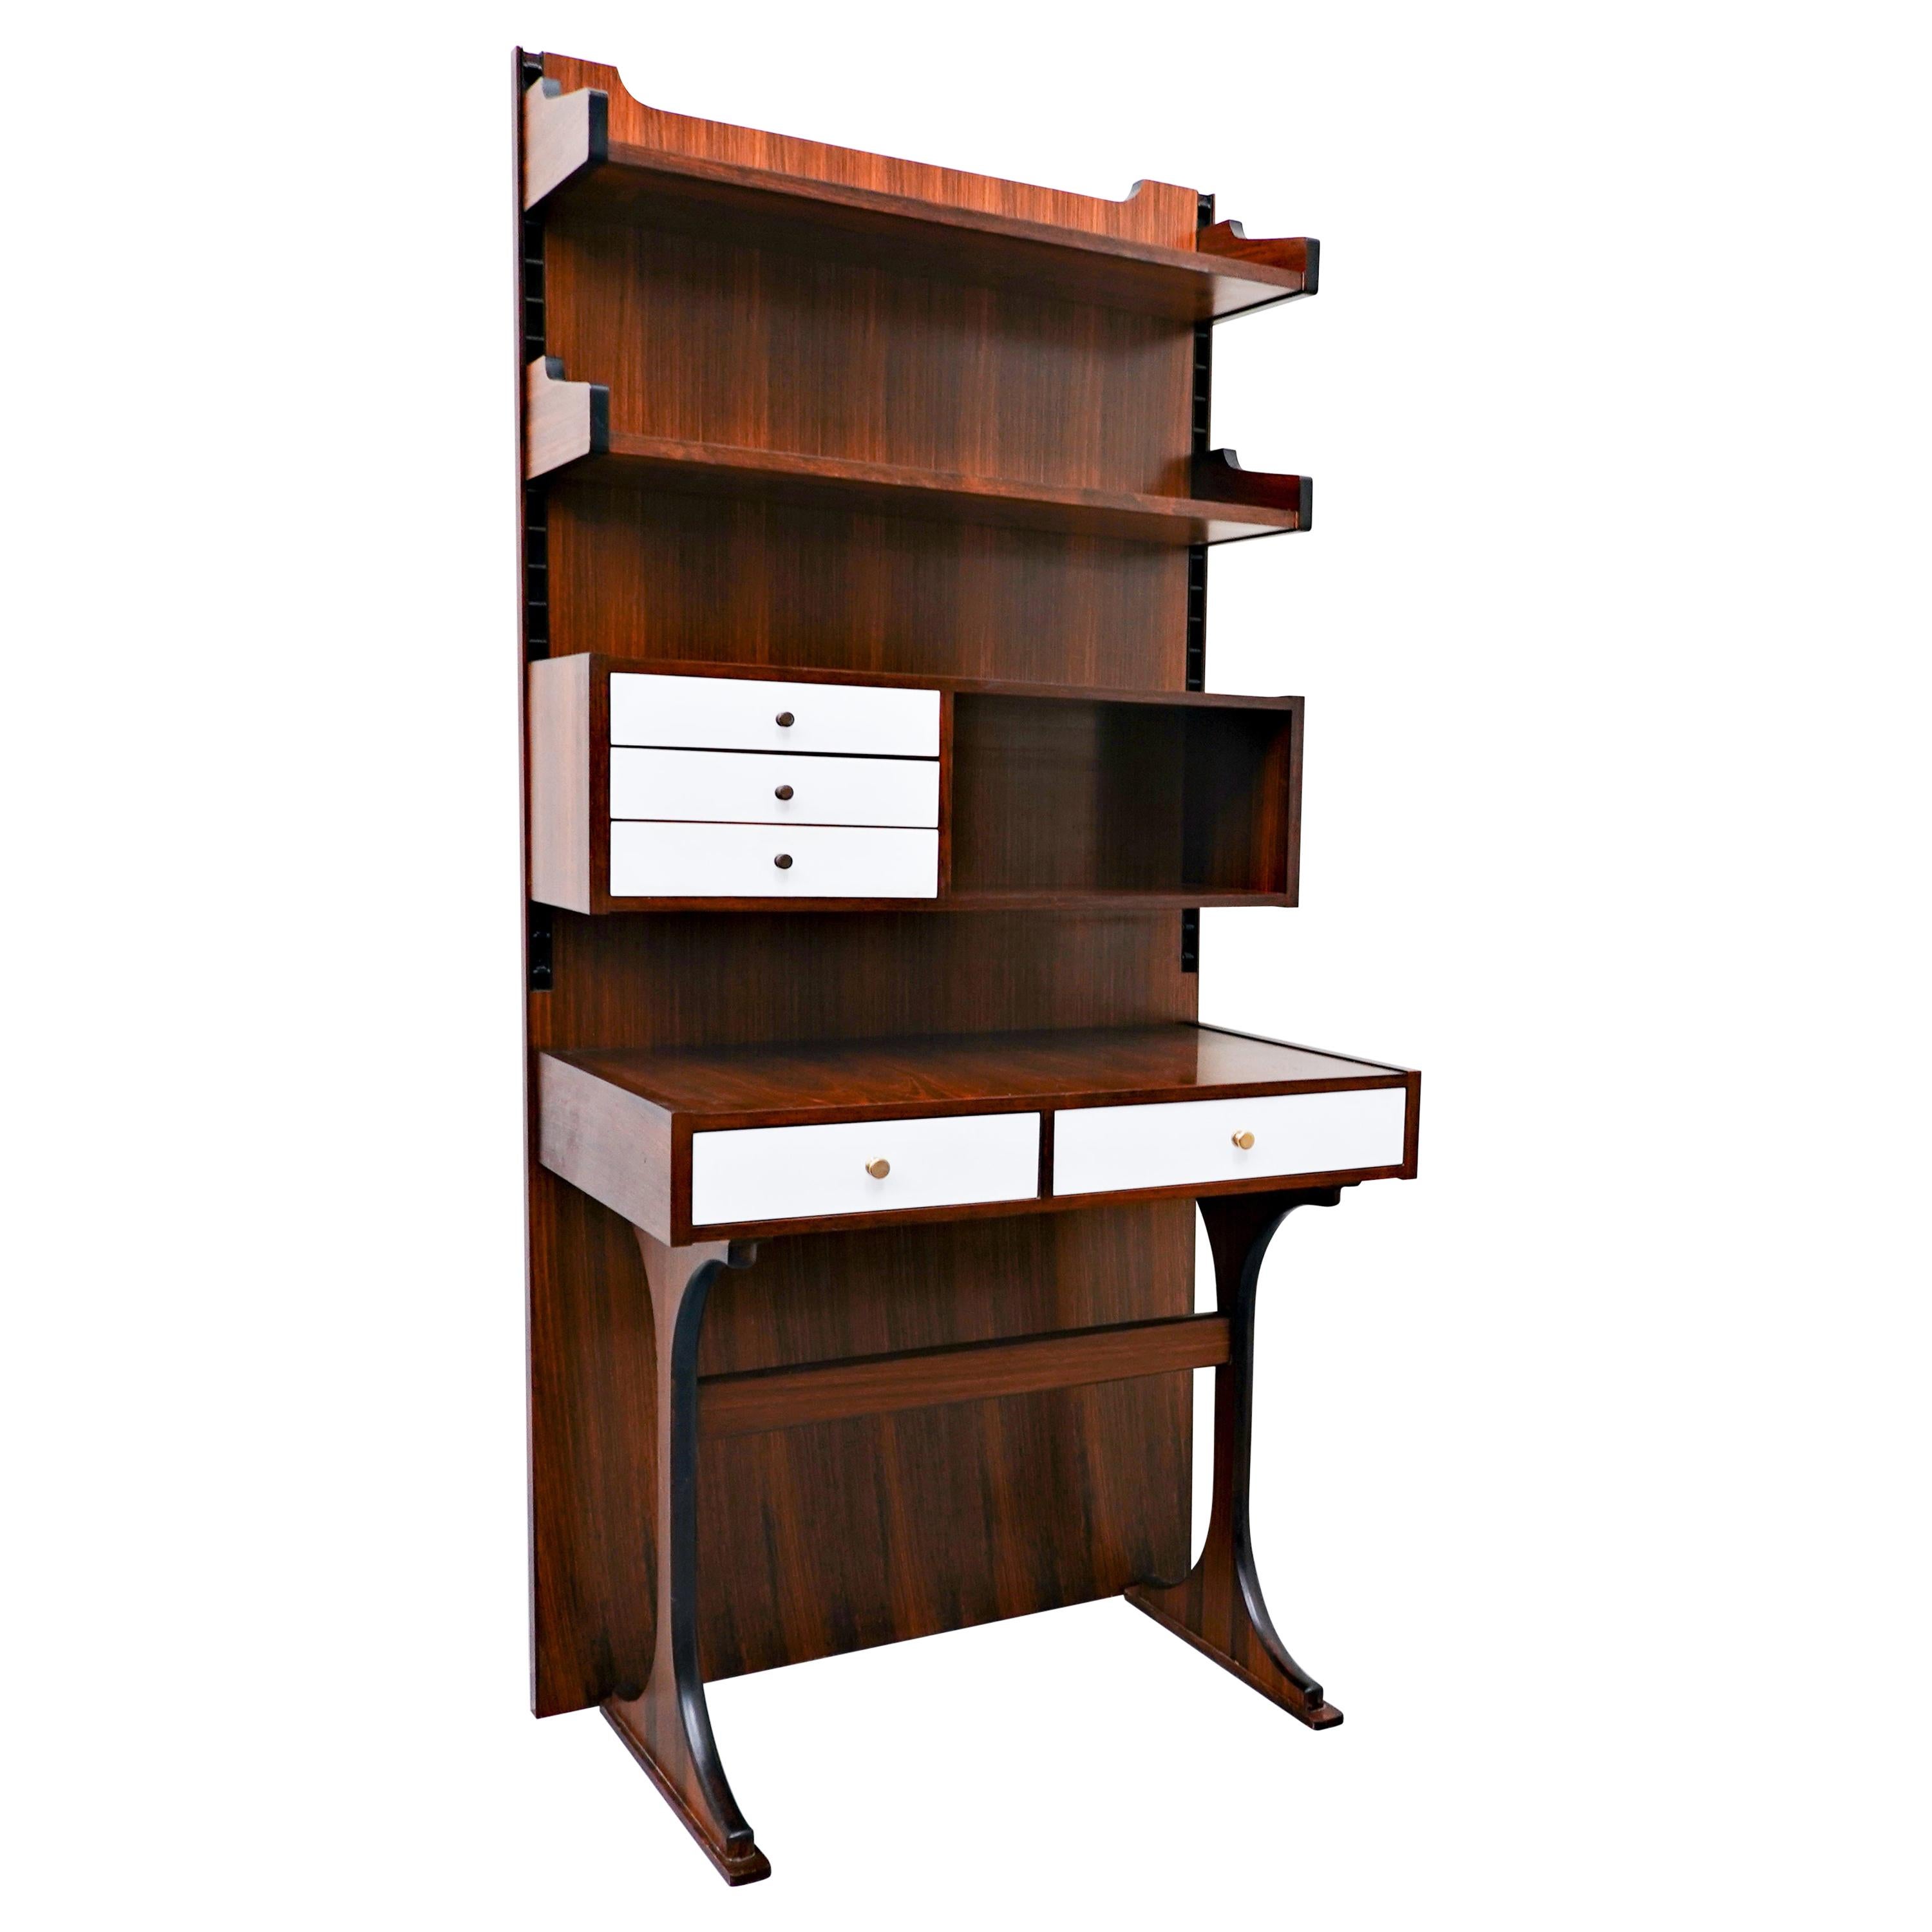 Mid-Century Modern Wall-Unit Desk Attributed to Sormani, Italy, 1960s